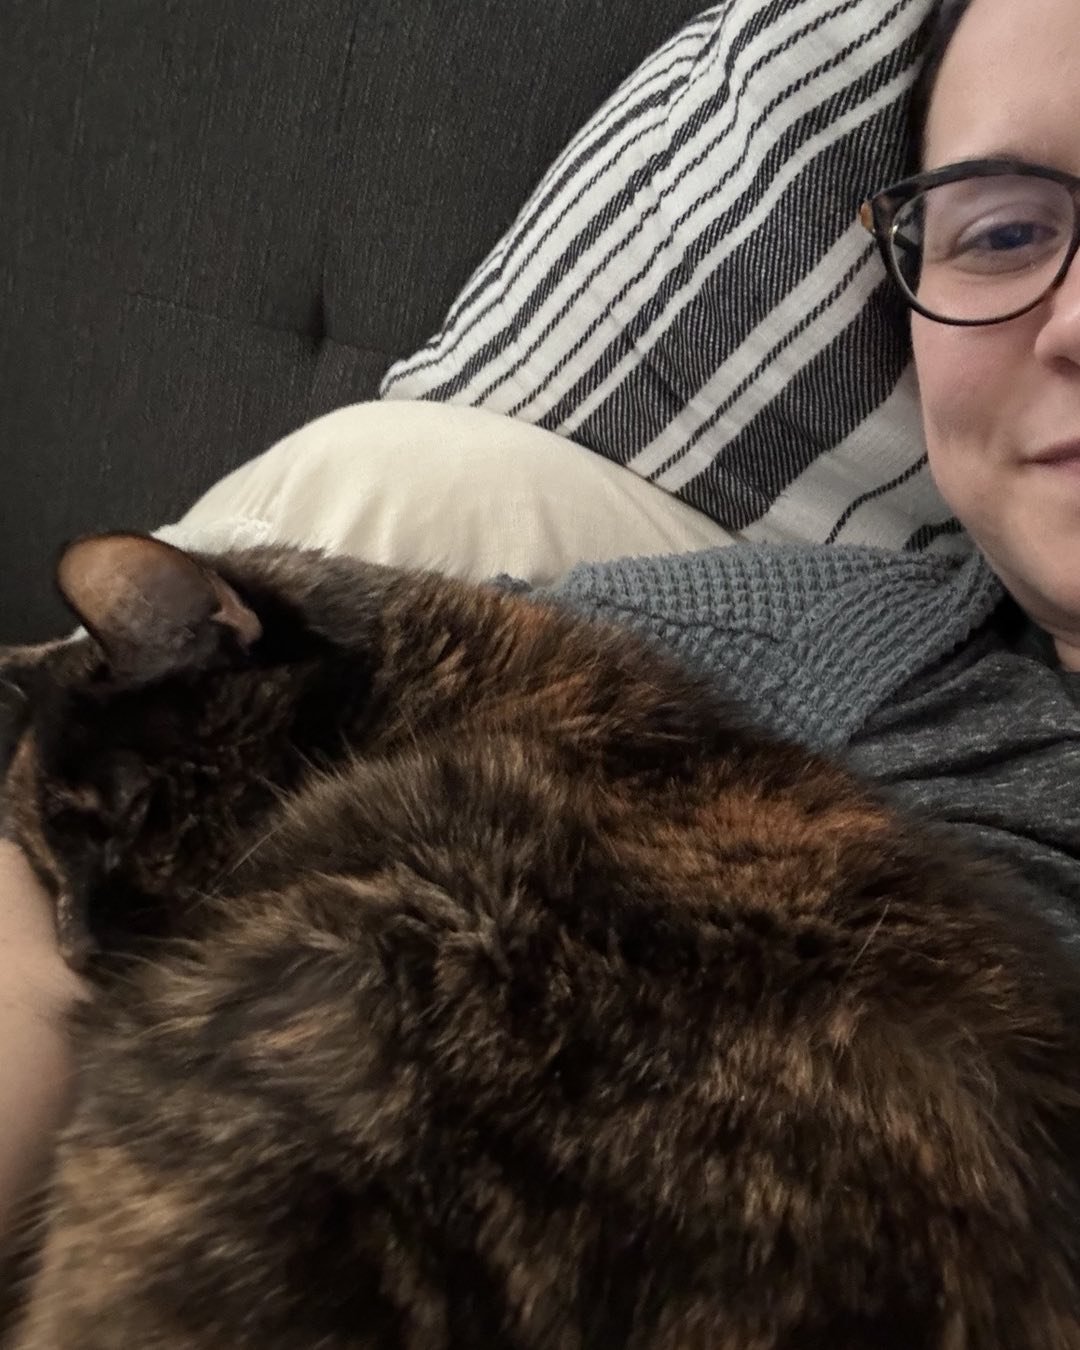 My Chief Meow Officer (CMO) turned 16 this week. You can find her crashing client calls and virtual trainings. She misses her liter mate brother as evidenced by her need for attention. But I do enjoy the daily snuggles.